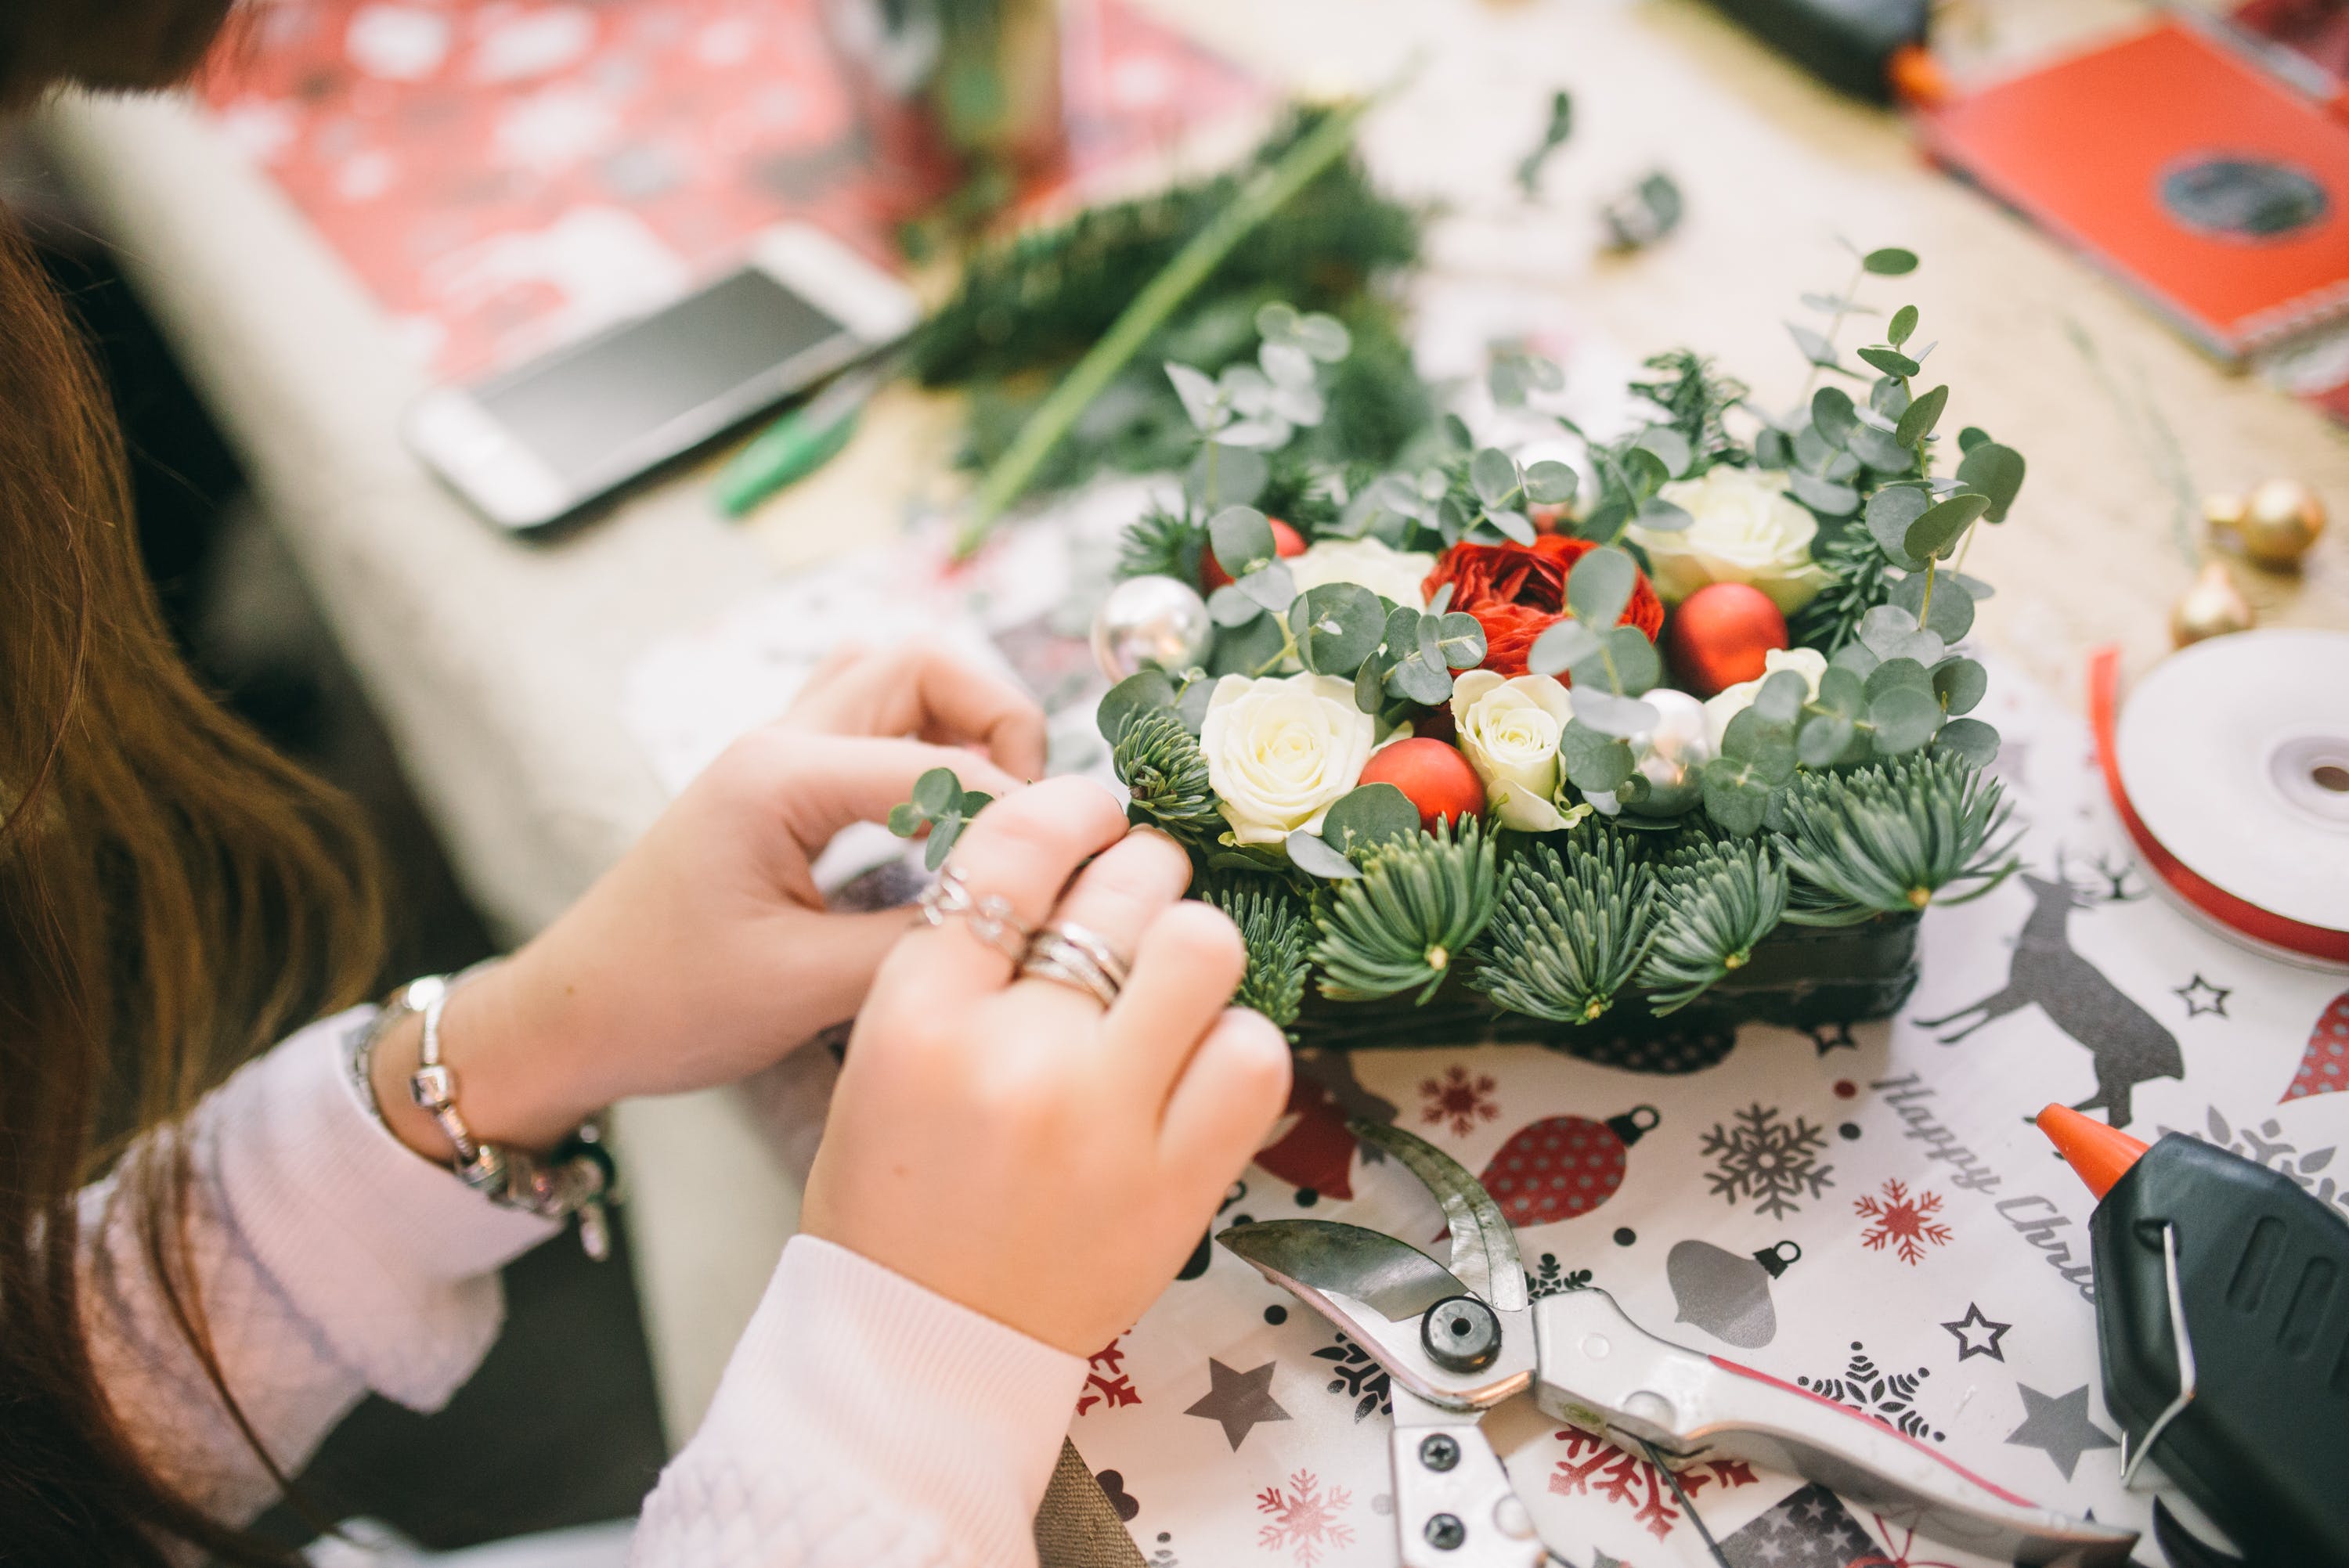 Adding Festive Cheer with Christmas Flowers For Home Decor